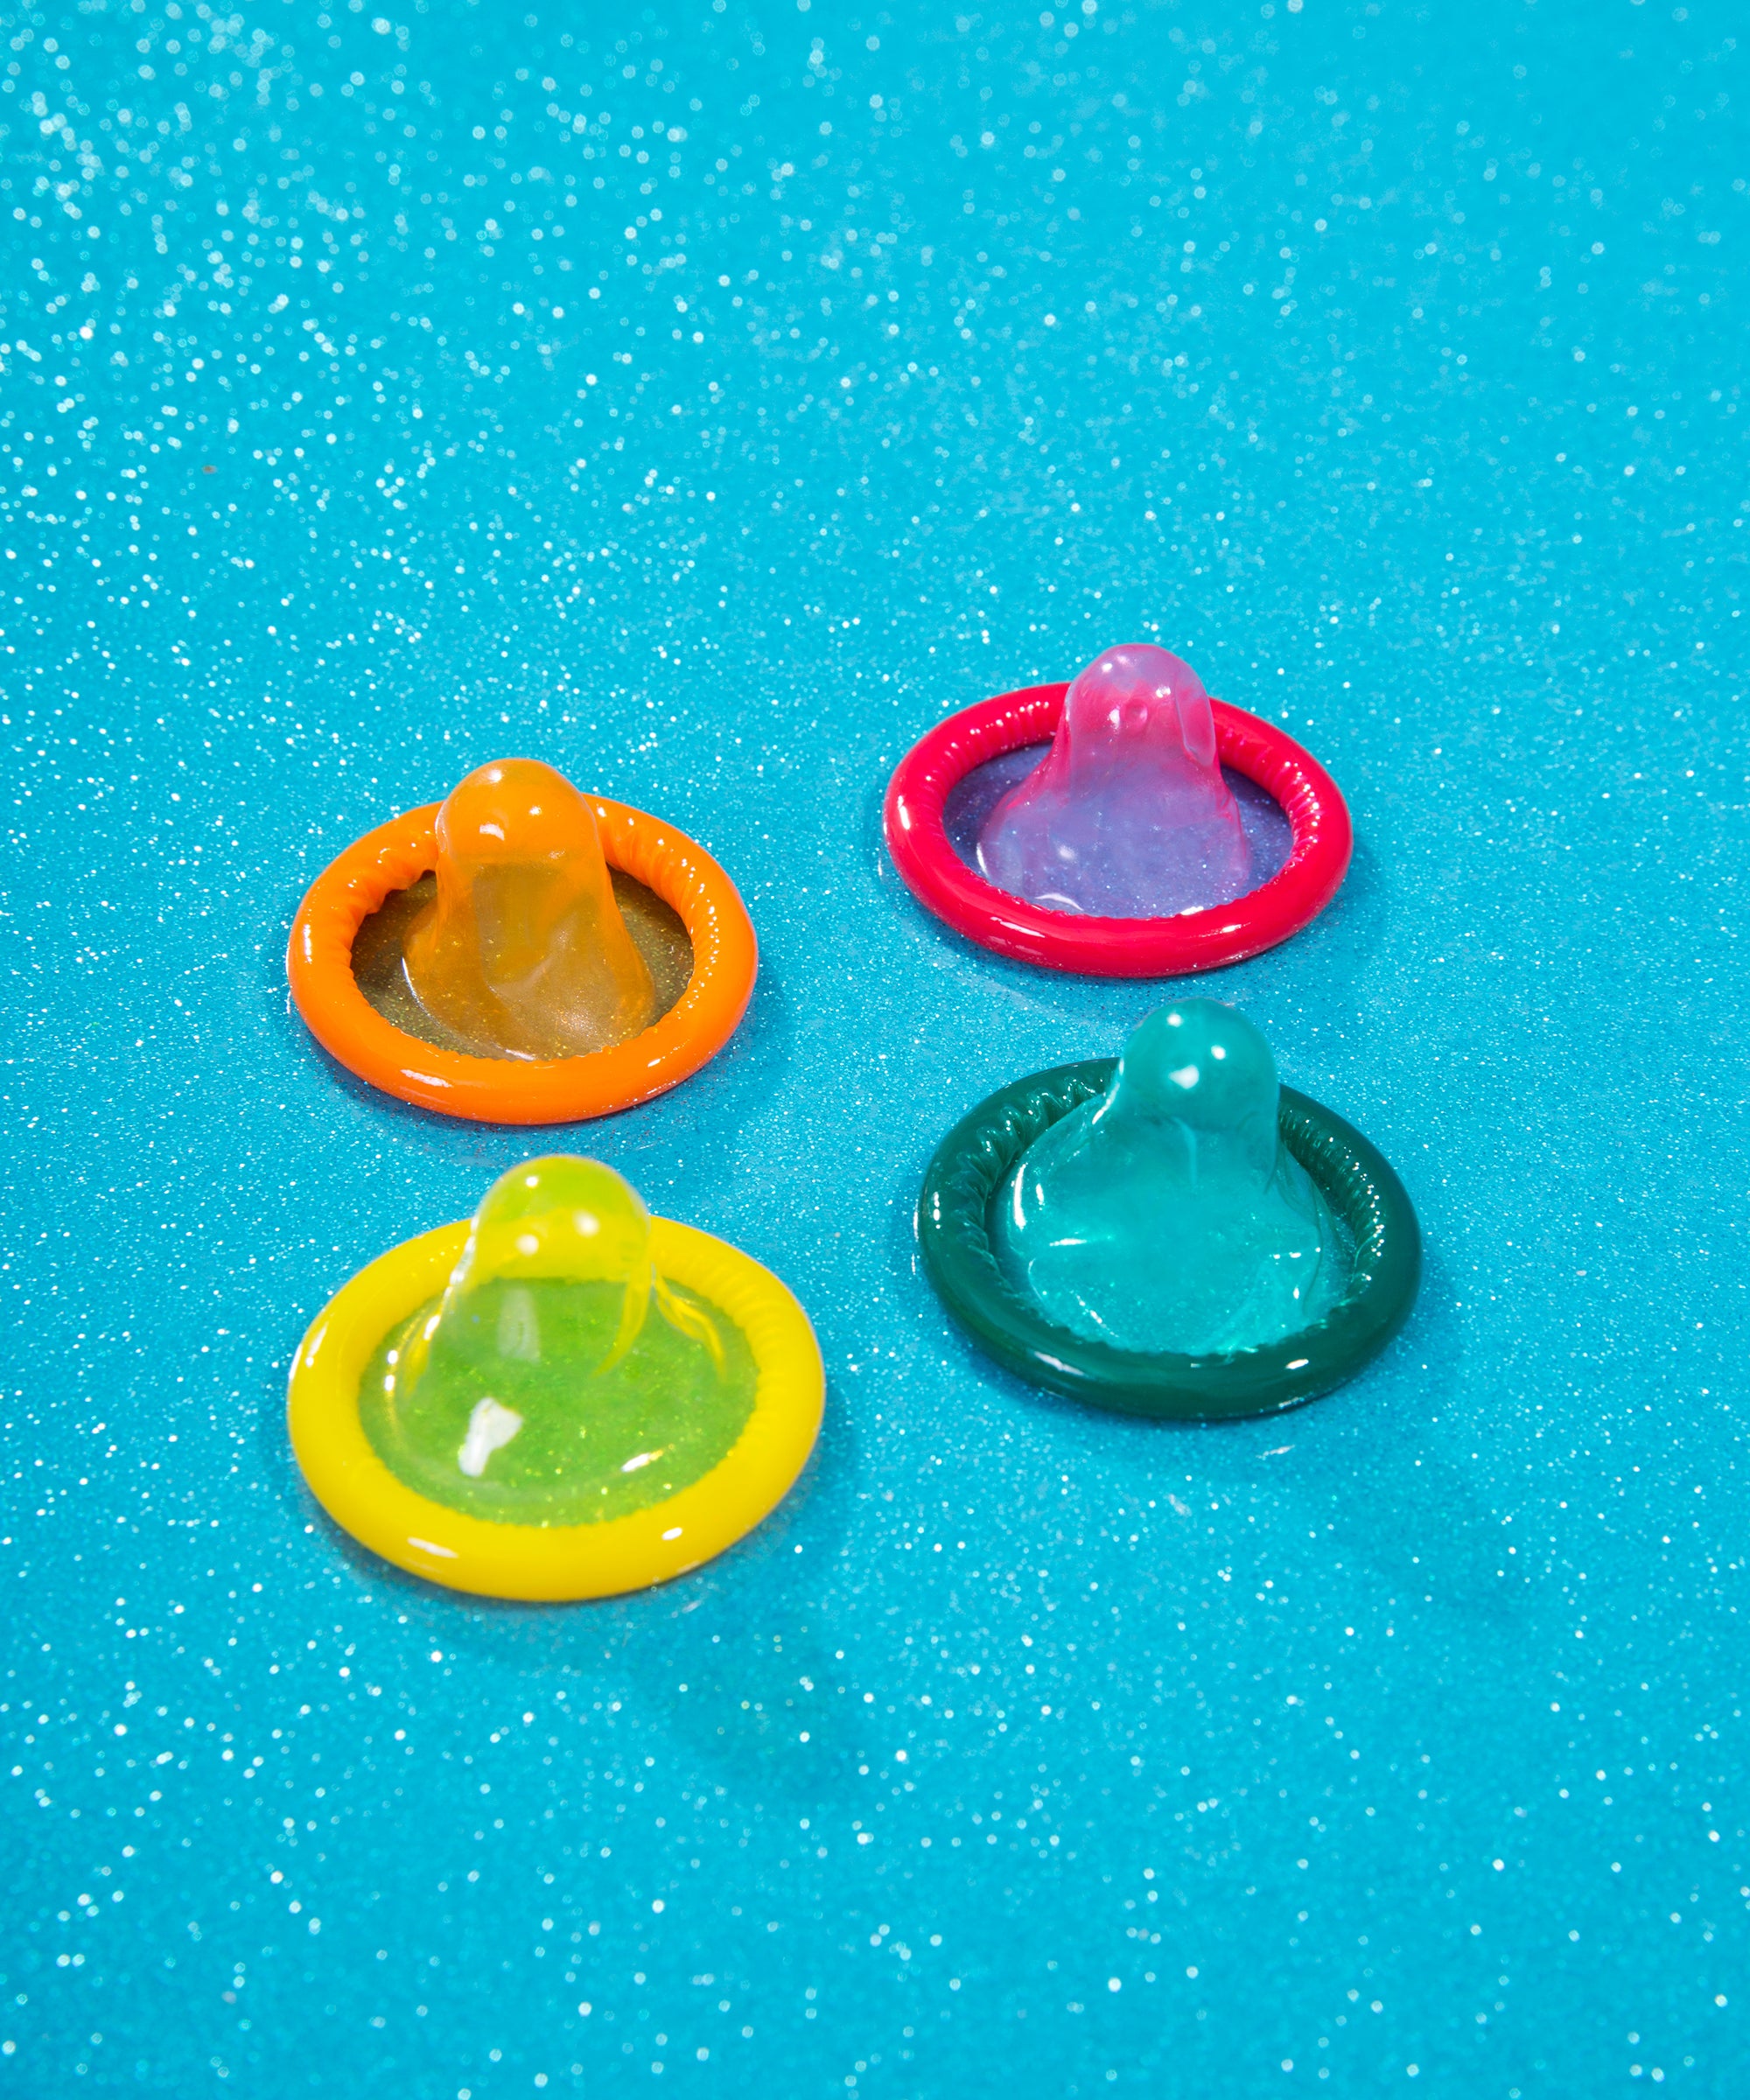 Condom Broke? How To Know and What To Do Next